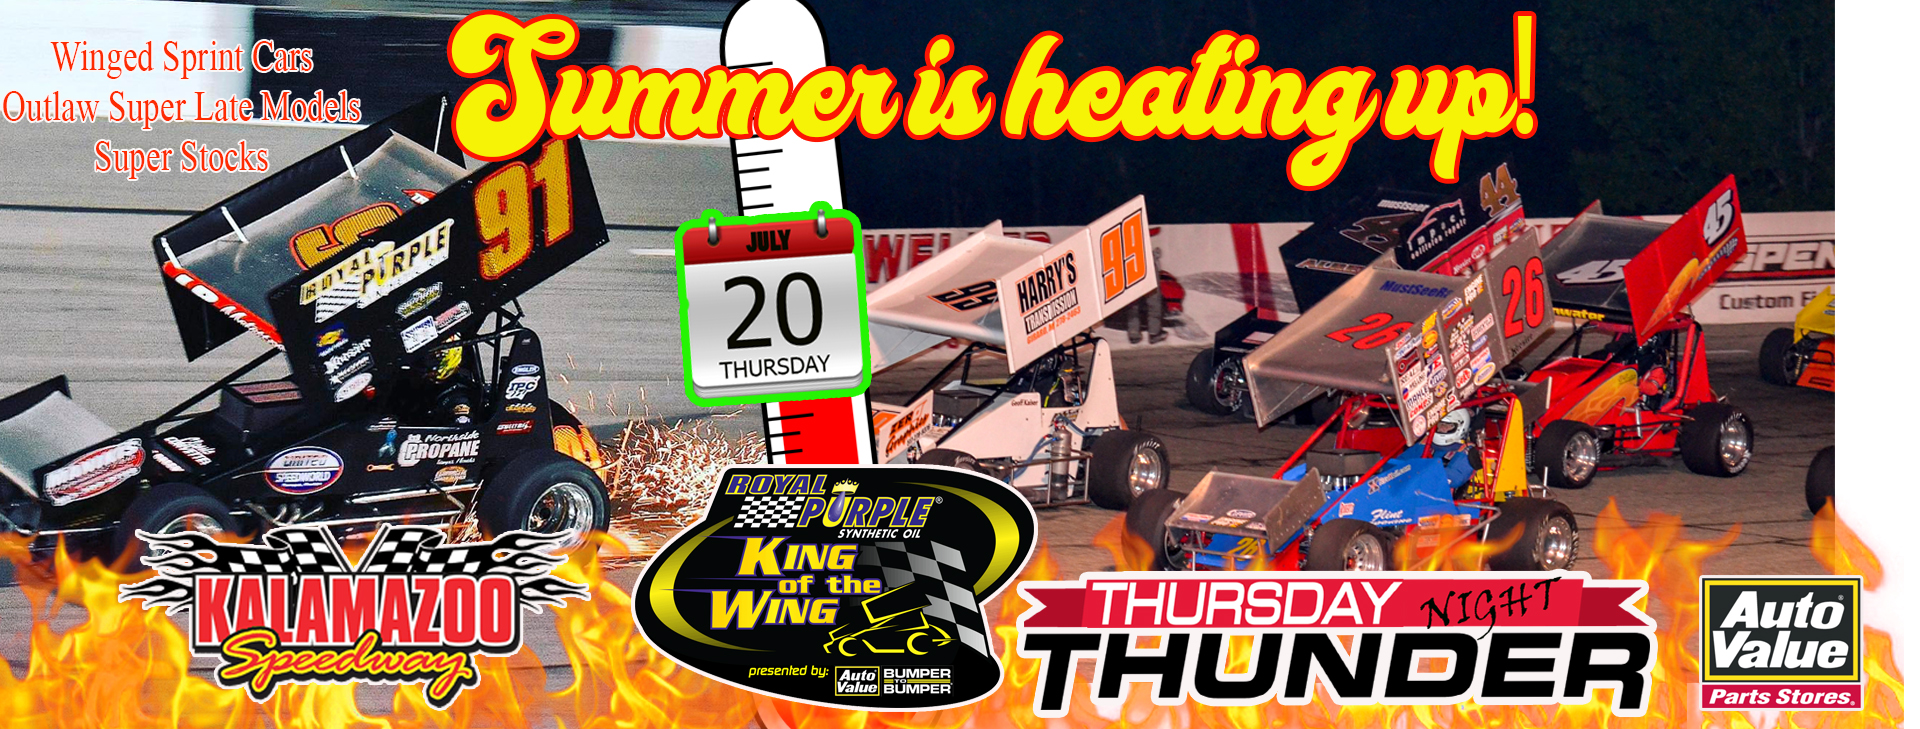 King of the Wing Winged Super Sprint Spectacular with NASCAR Outlaw Super Late Models & Super Stocks